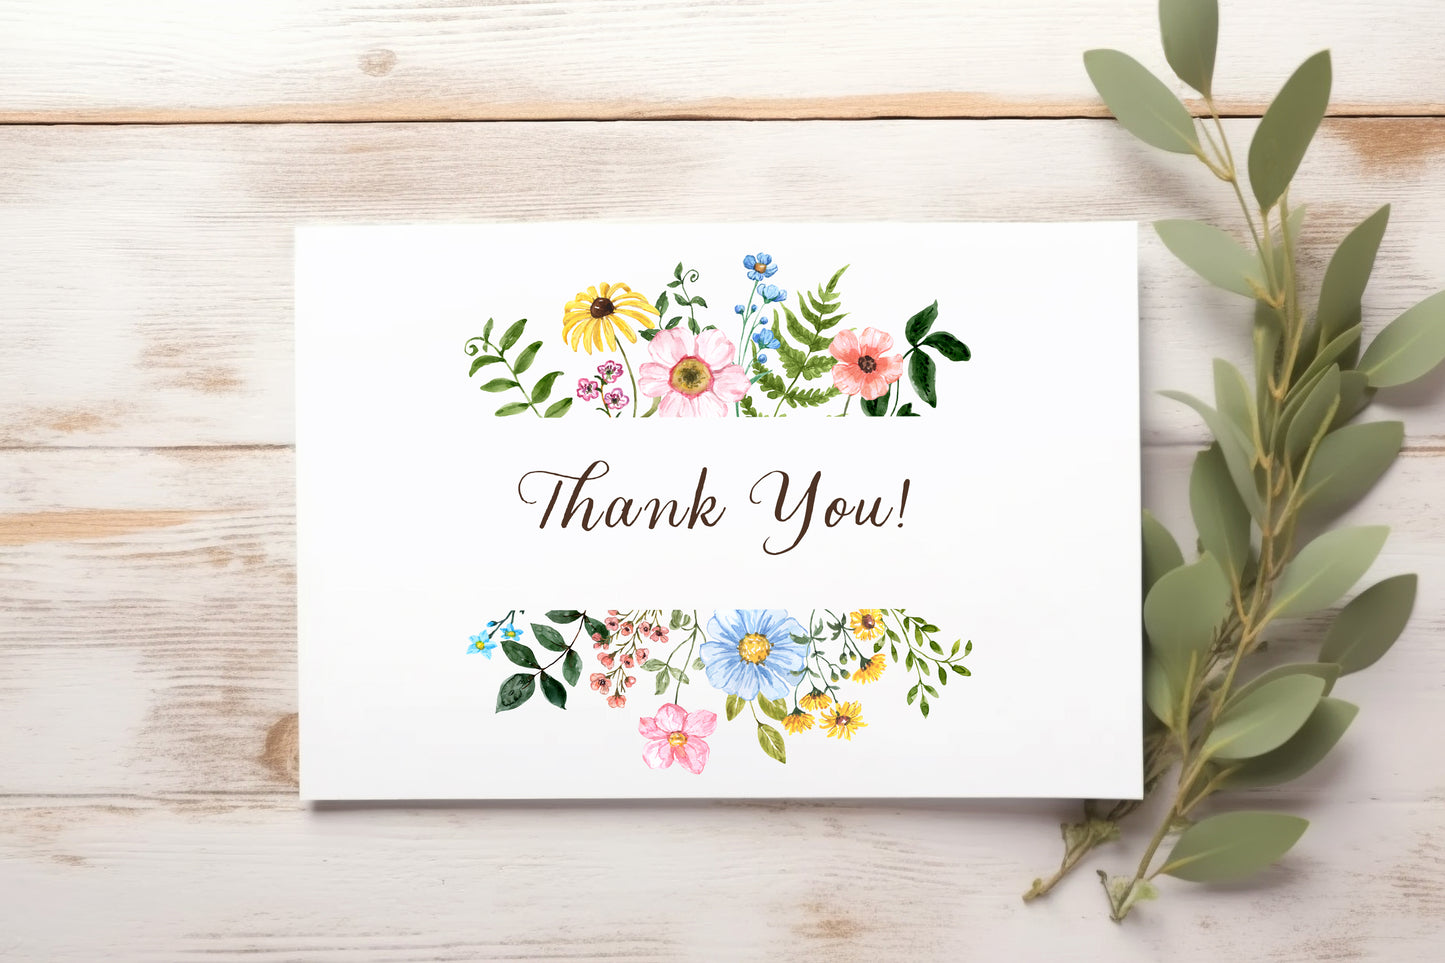 Watercolor Boho Wildflowers Frames and Wreaths clipart, watercolor wildflower clipart, wild flower frame, wildflower wedding thank you card